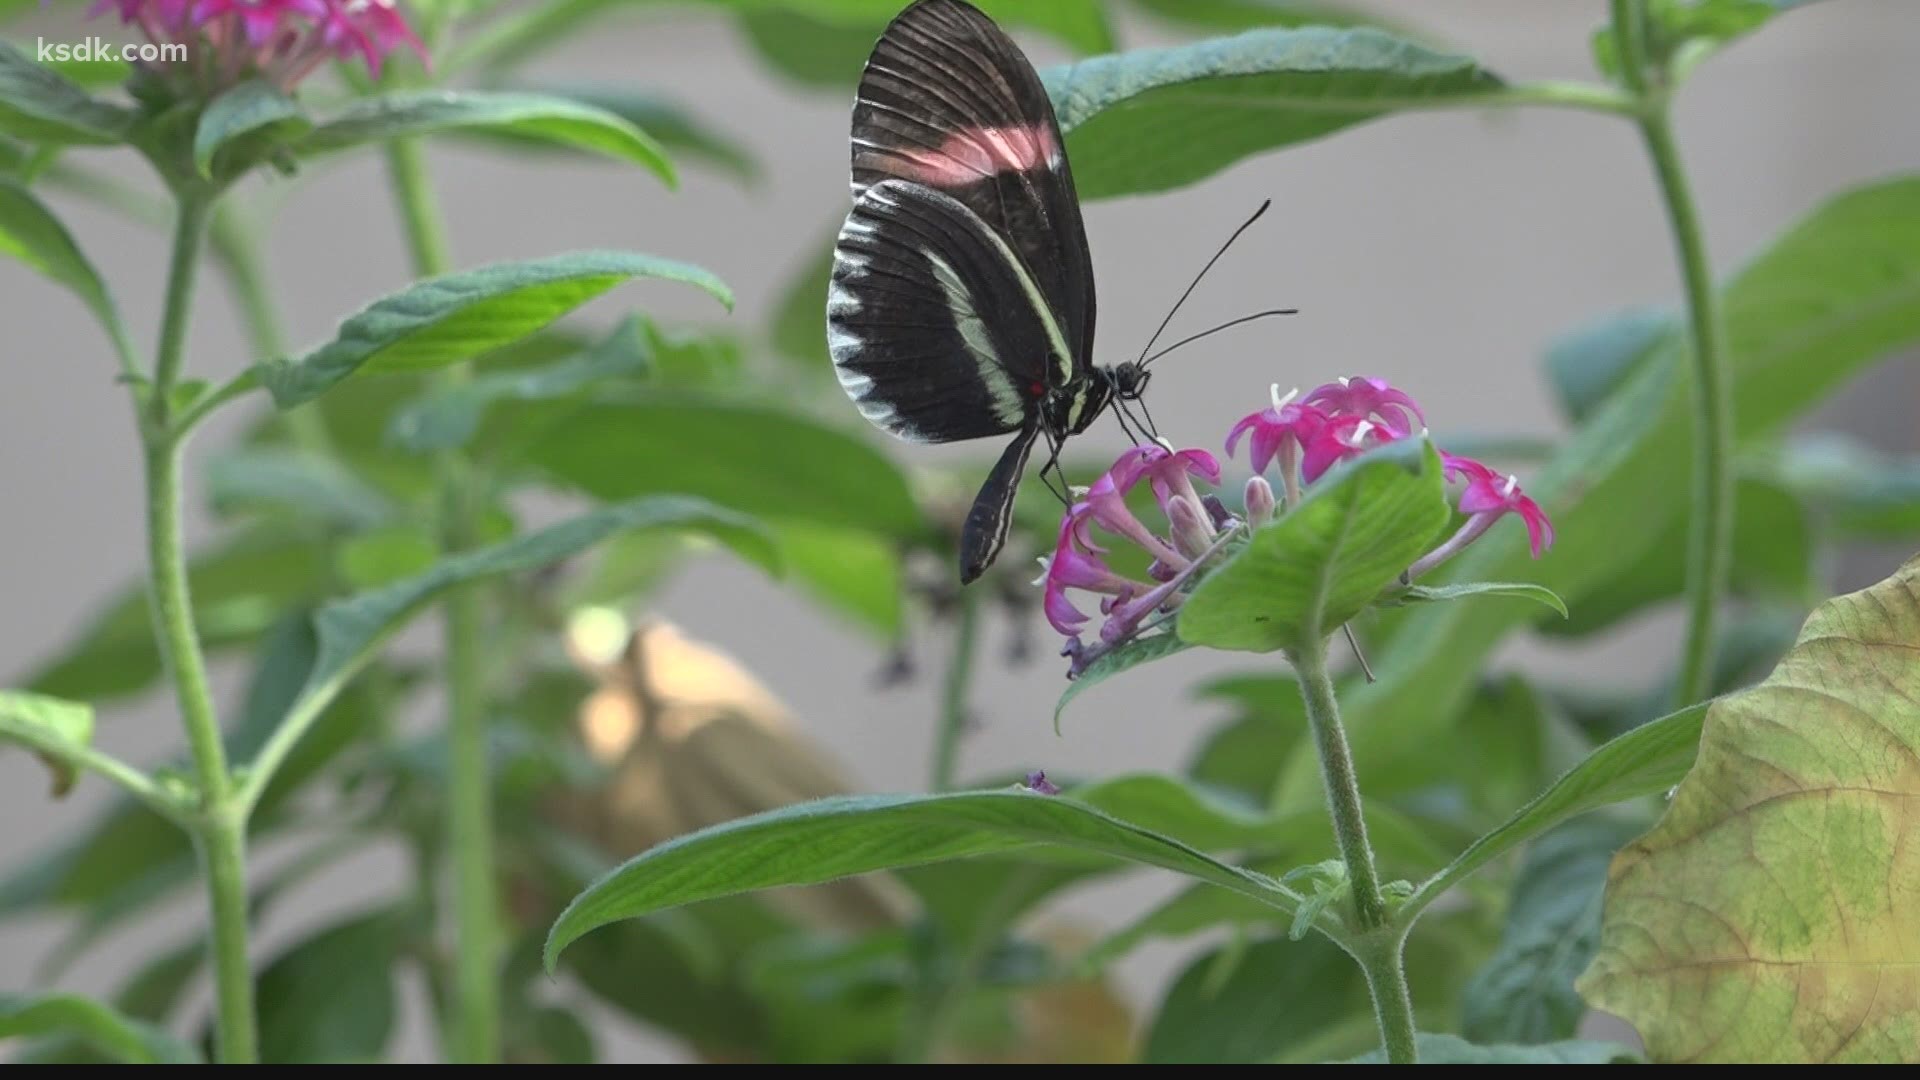 The Butterfly House had temporarily closed in compliance with St. Louis County restrictions